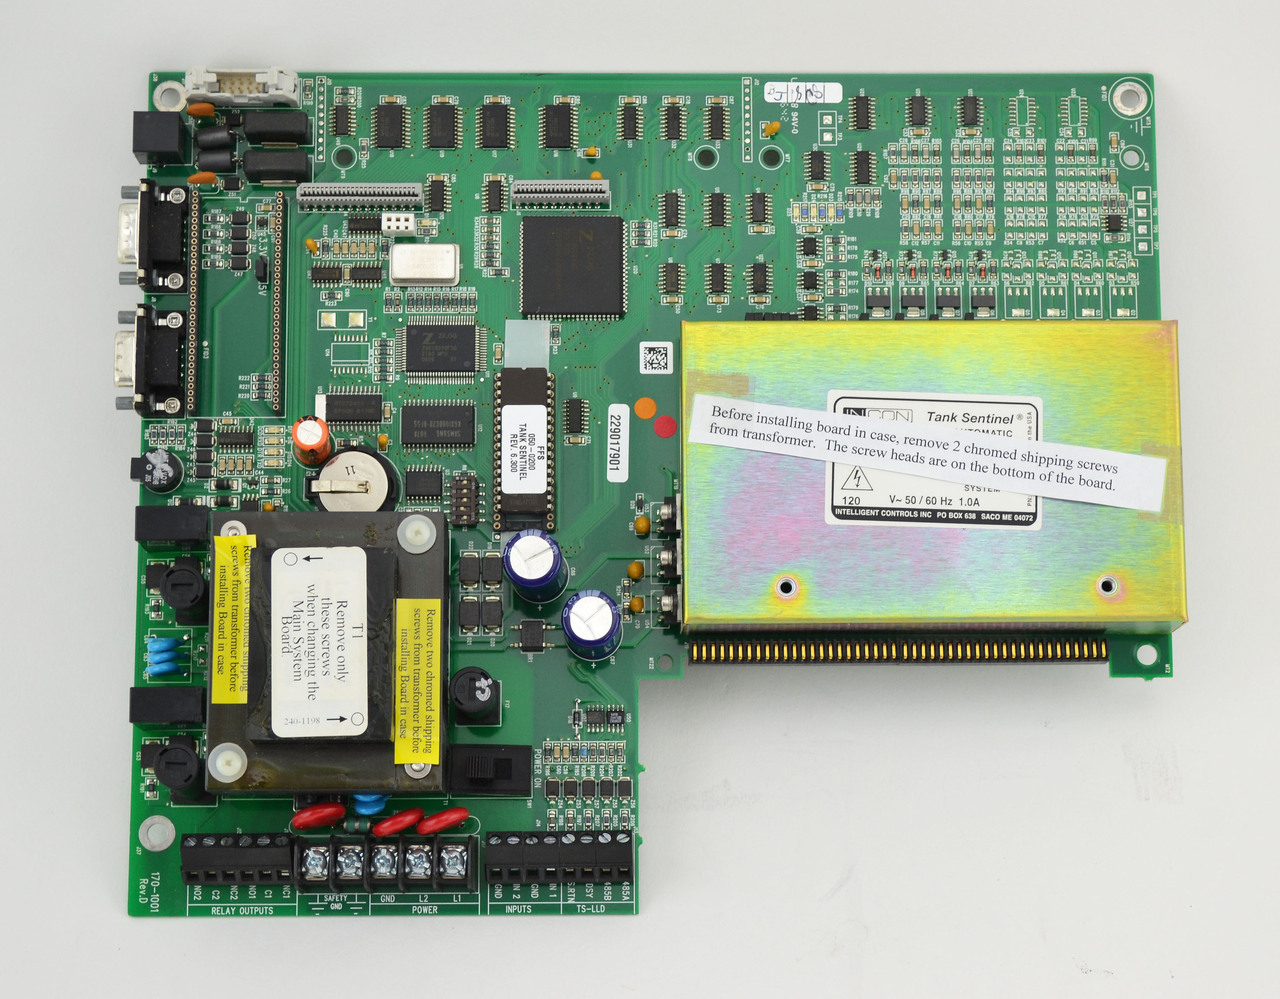 TS-1001 MAIN SYSTEM BOARD, Fits Incon